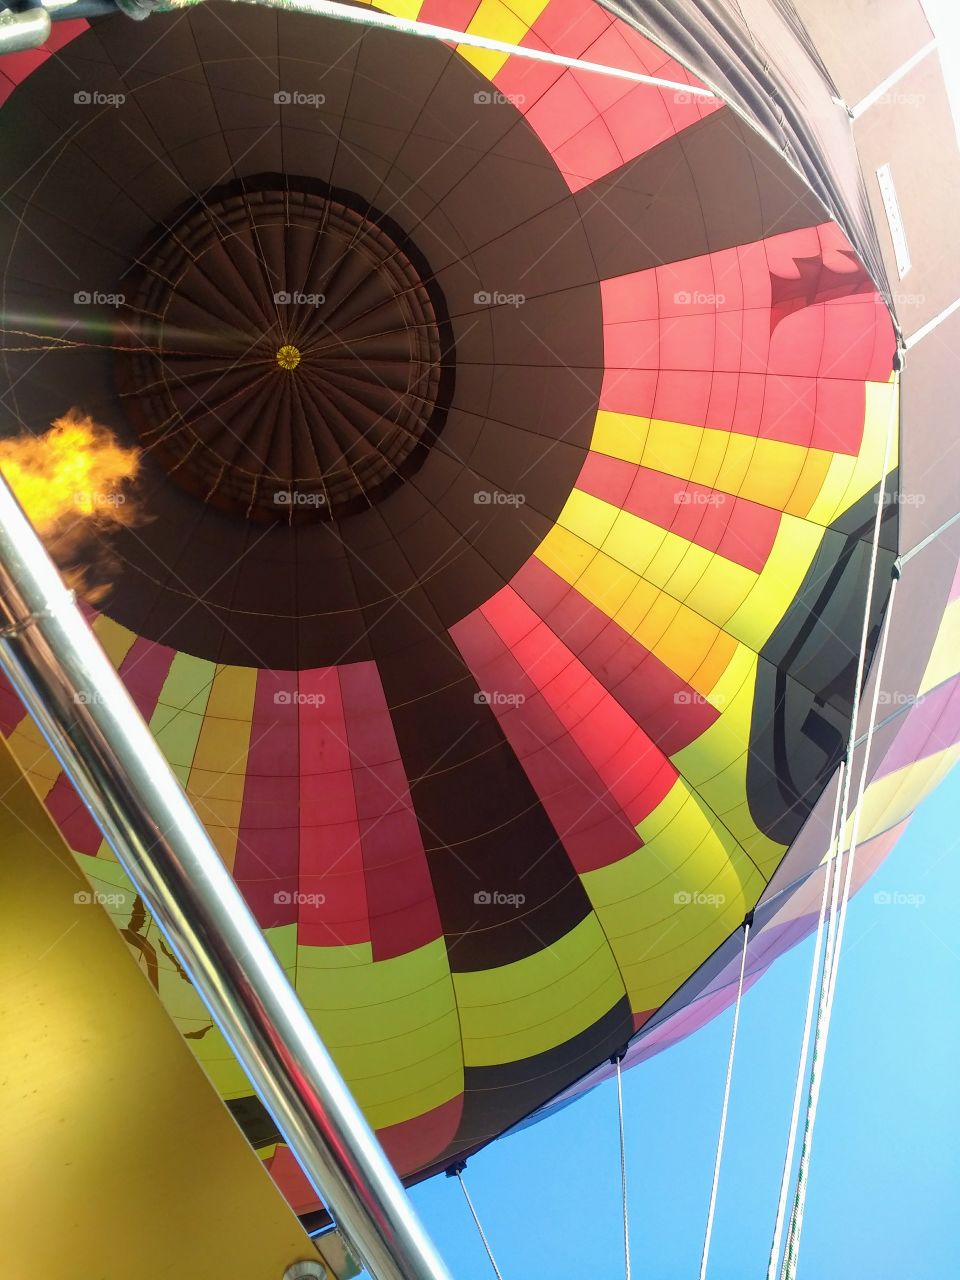 Flying in a red, yellow, and brown hot air balloon